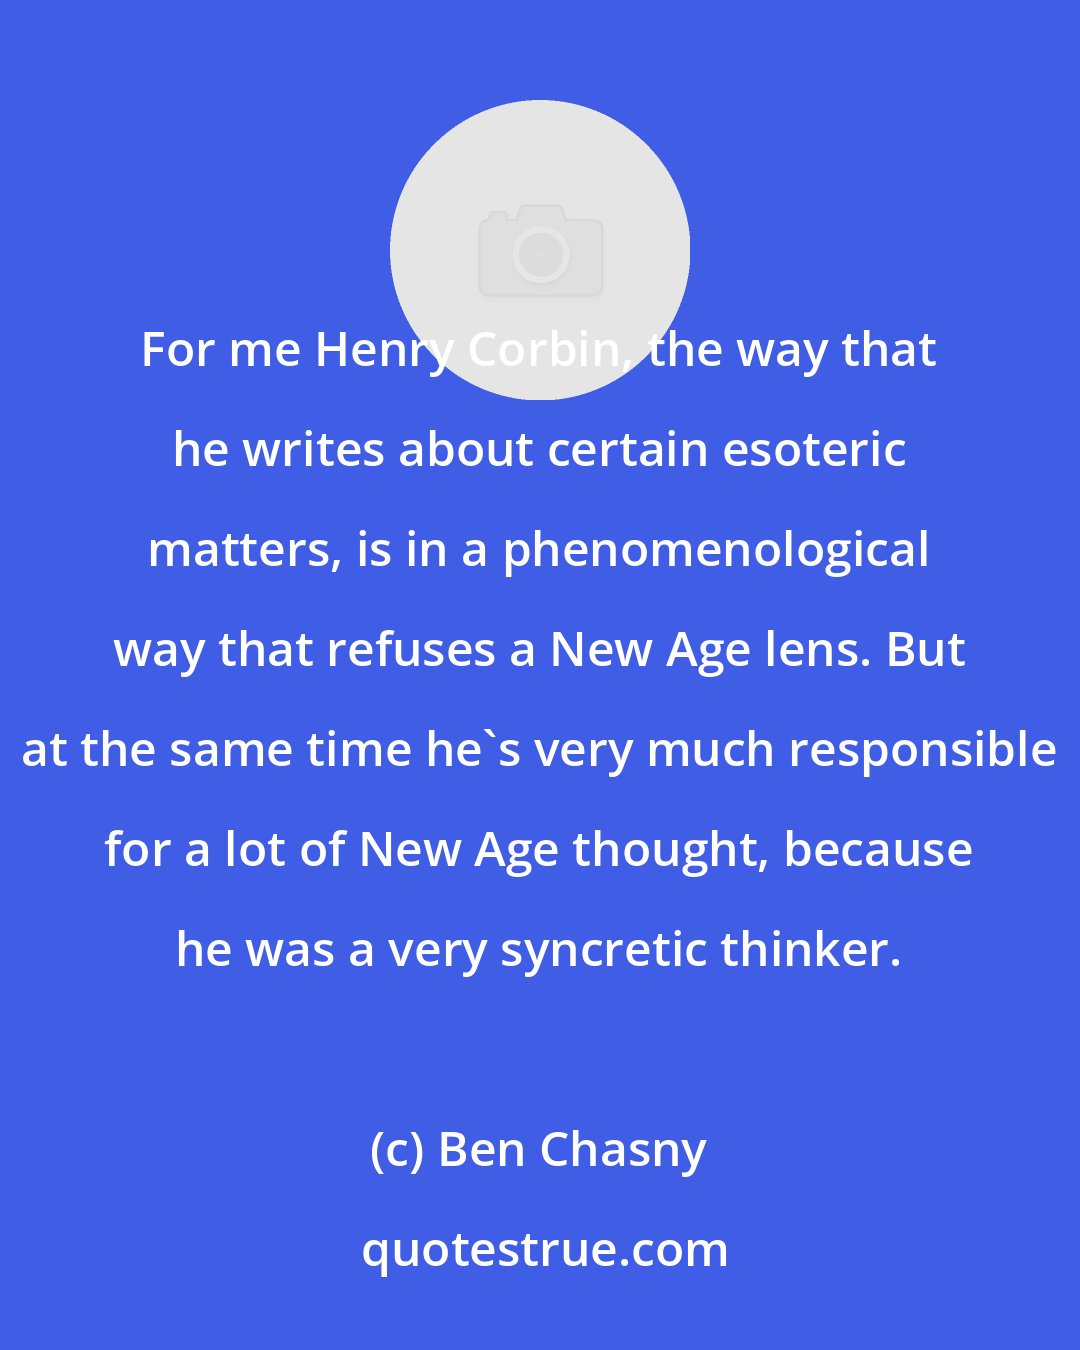 Ben Chasny: For me Henry Corbin, the way that he writes about certain esoteric matters, is in a phenomenological way that refuses a New Age lens. But at the same time he's very much responsible for a lot of New Age thought, because he was a very syncretic thinker.